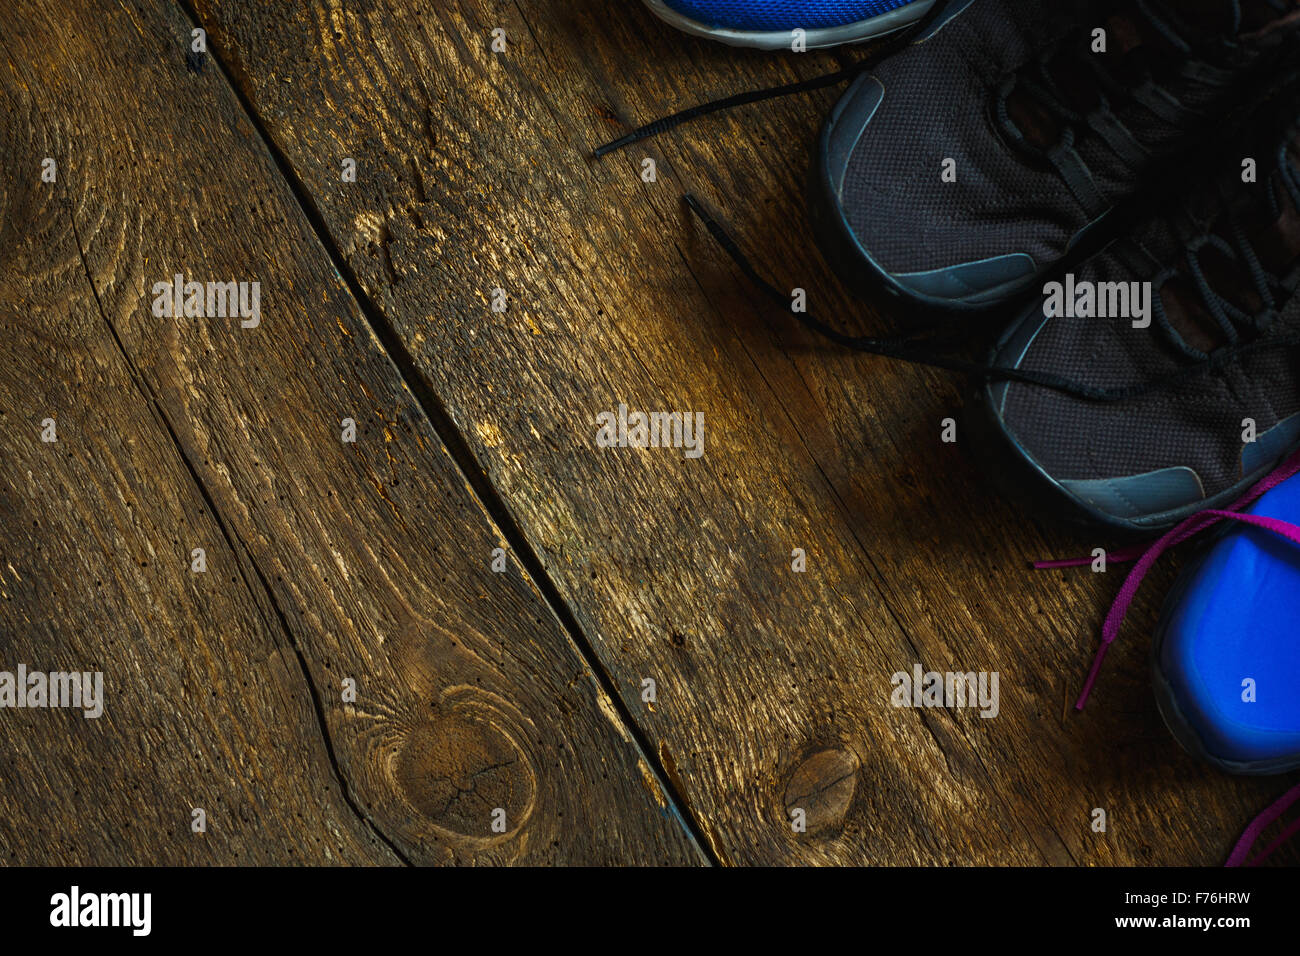 Sport, fitness, shoes, footwear concept - close up of sneakers on wooden background Stock Photo